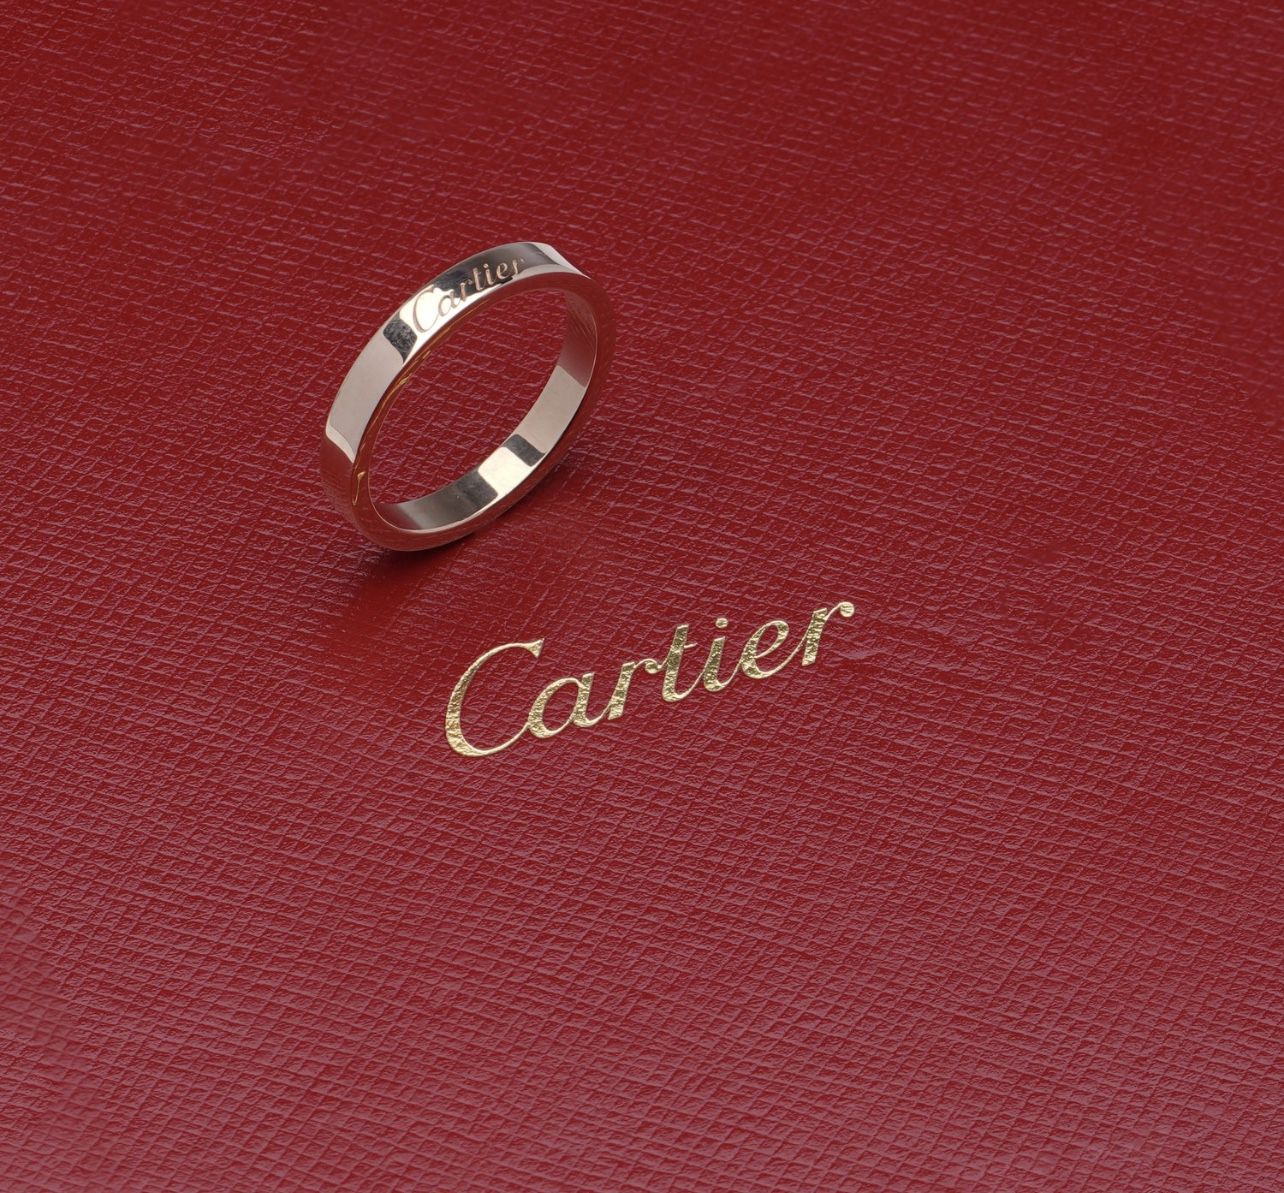 Cartier Ring 